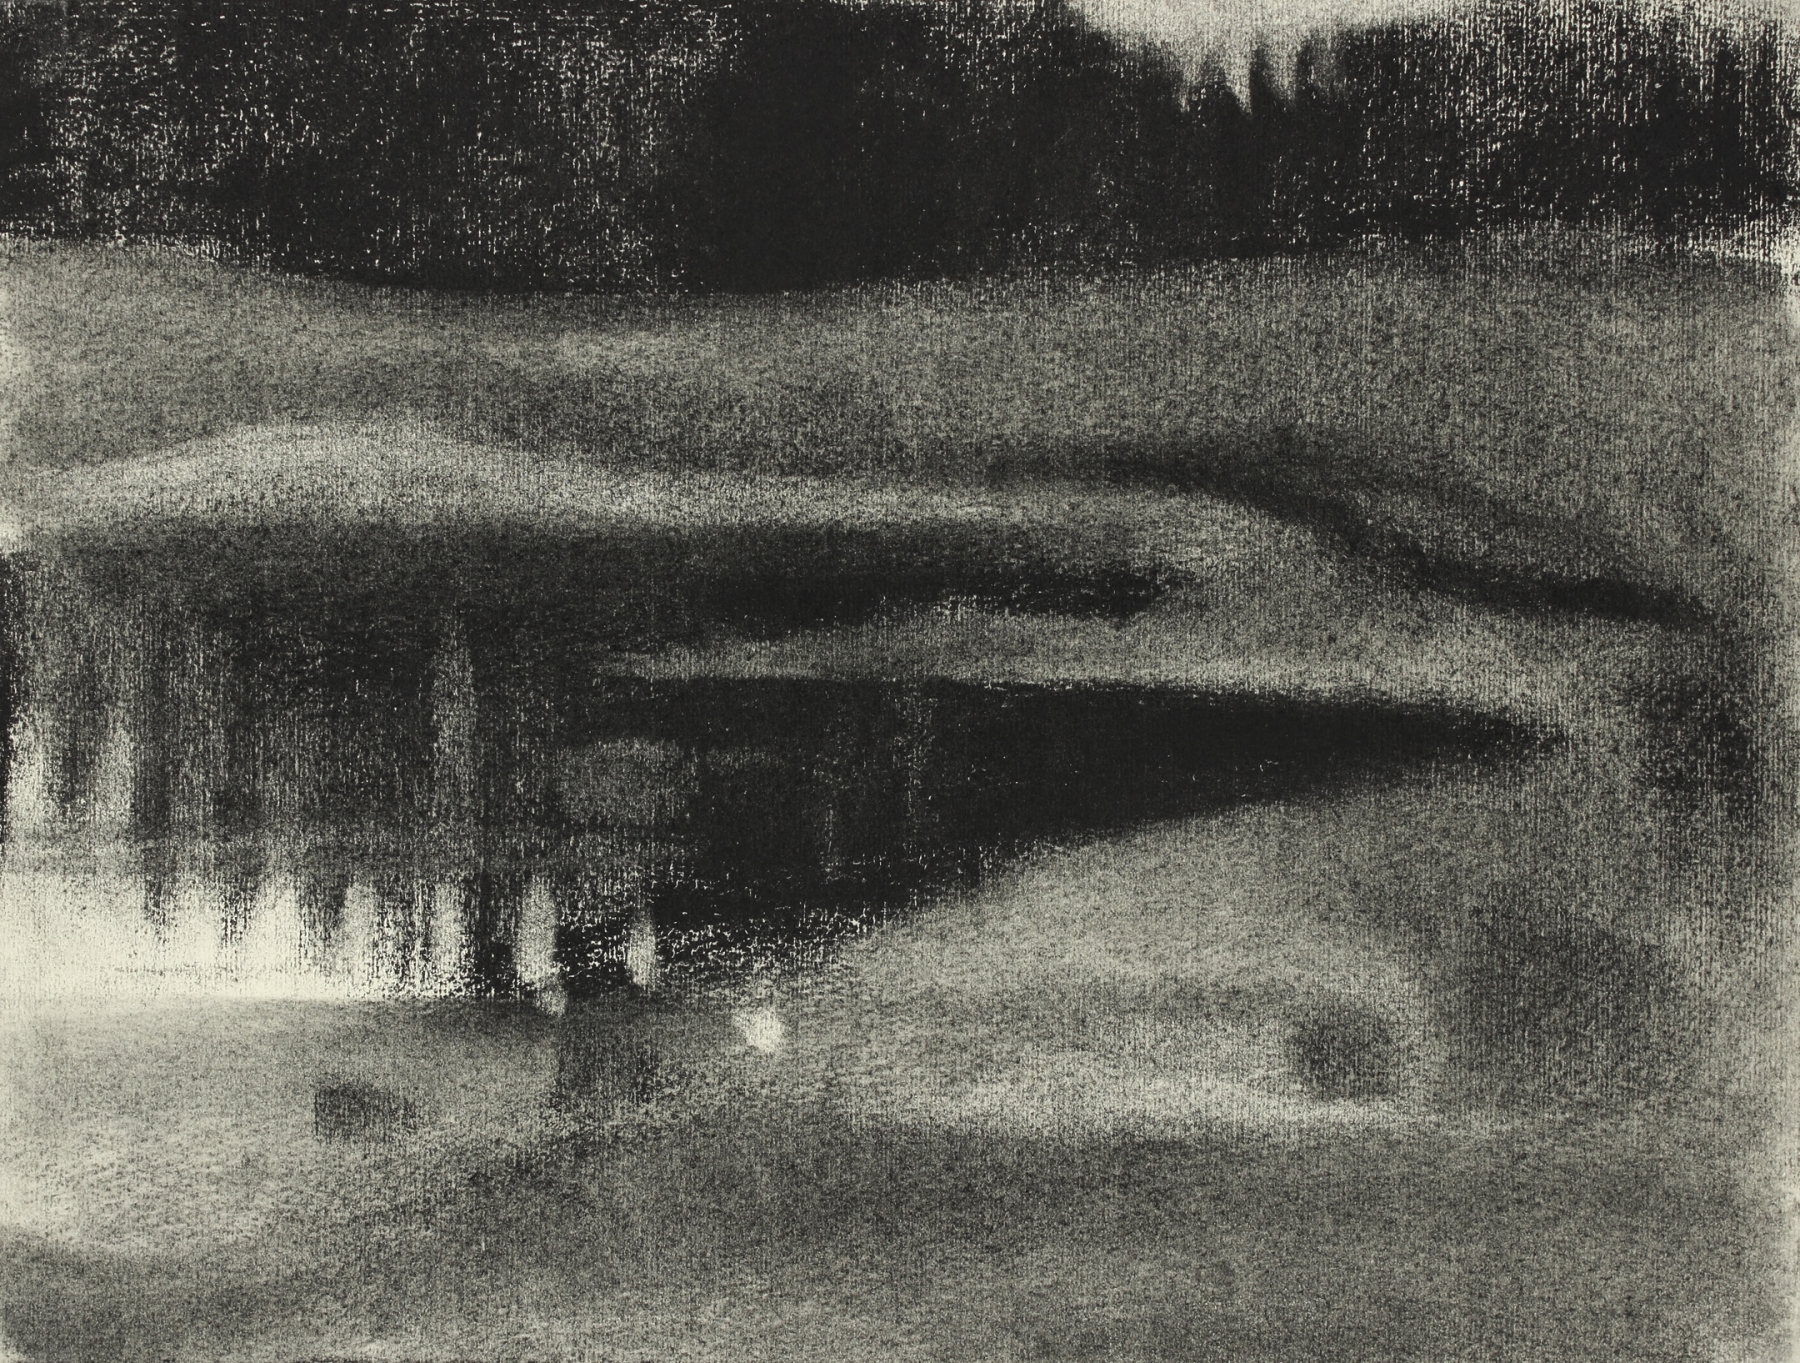 Untitled, c. 1975, charcoal on paper, 10 x 13 1/4 inches